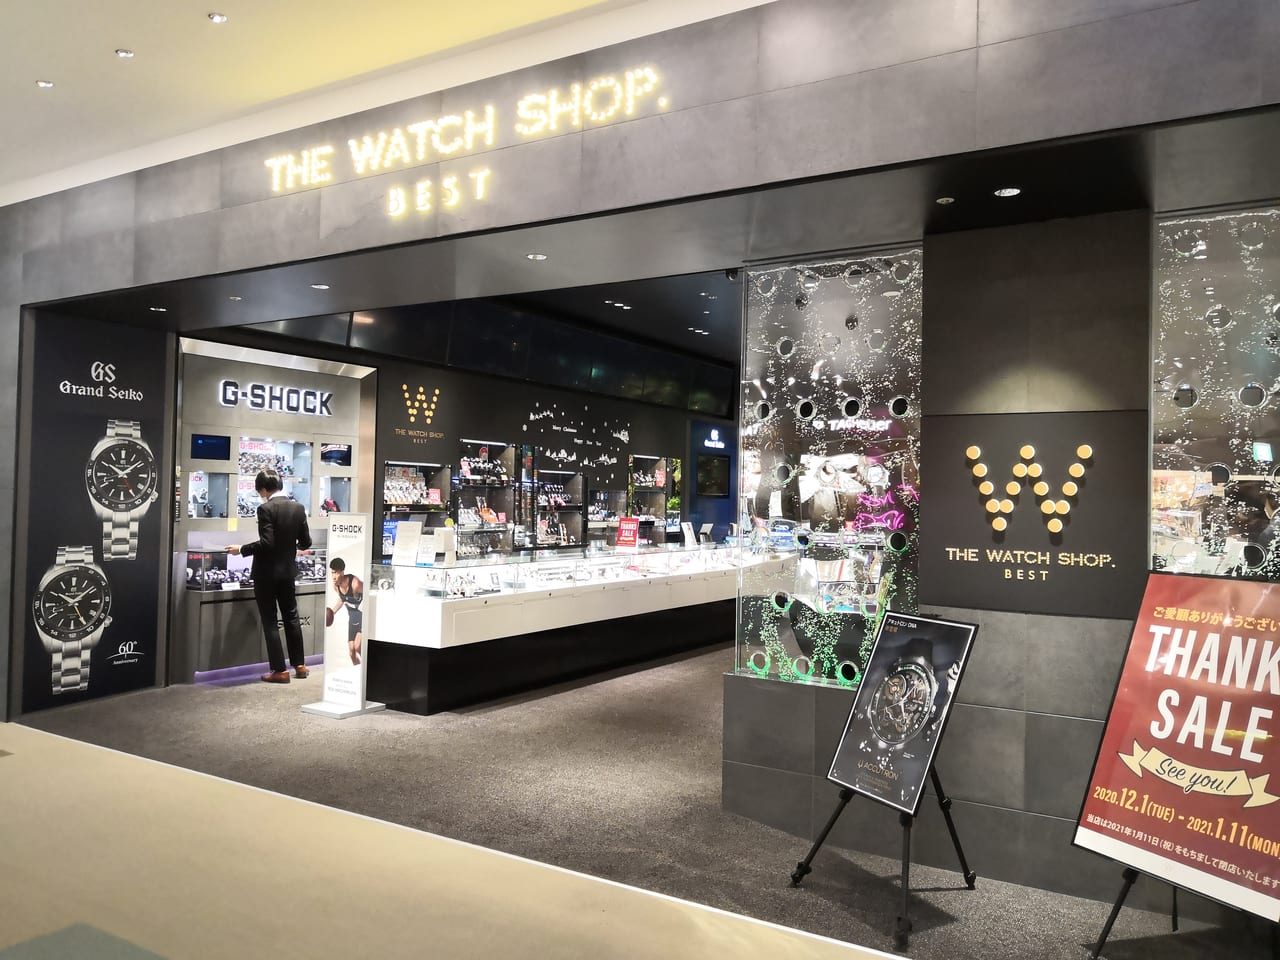 THE WATCH SHOP